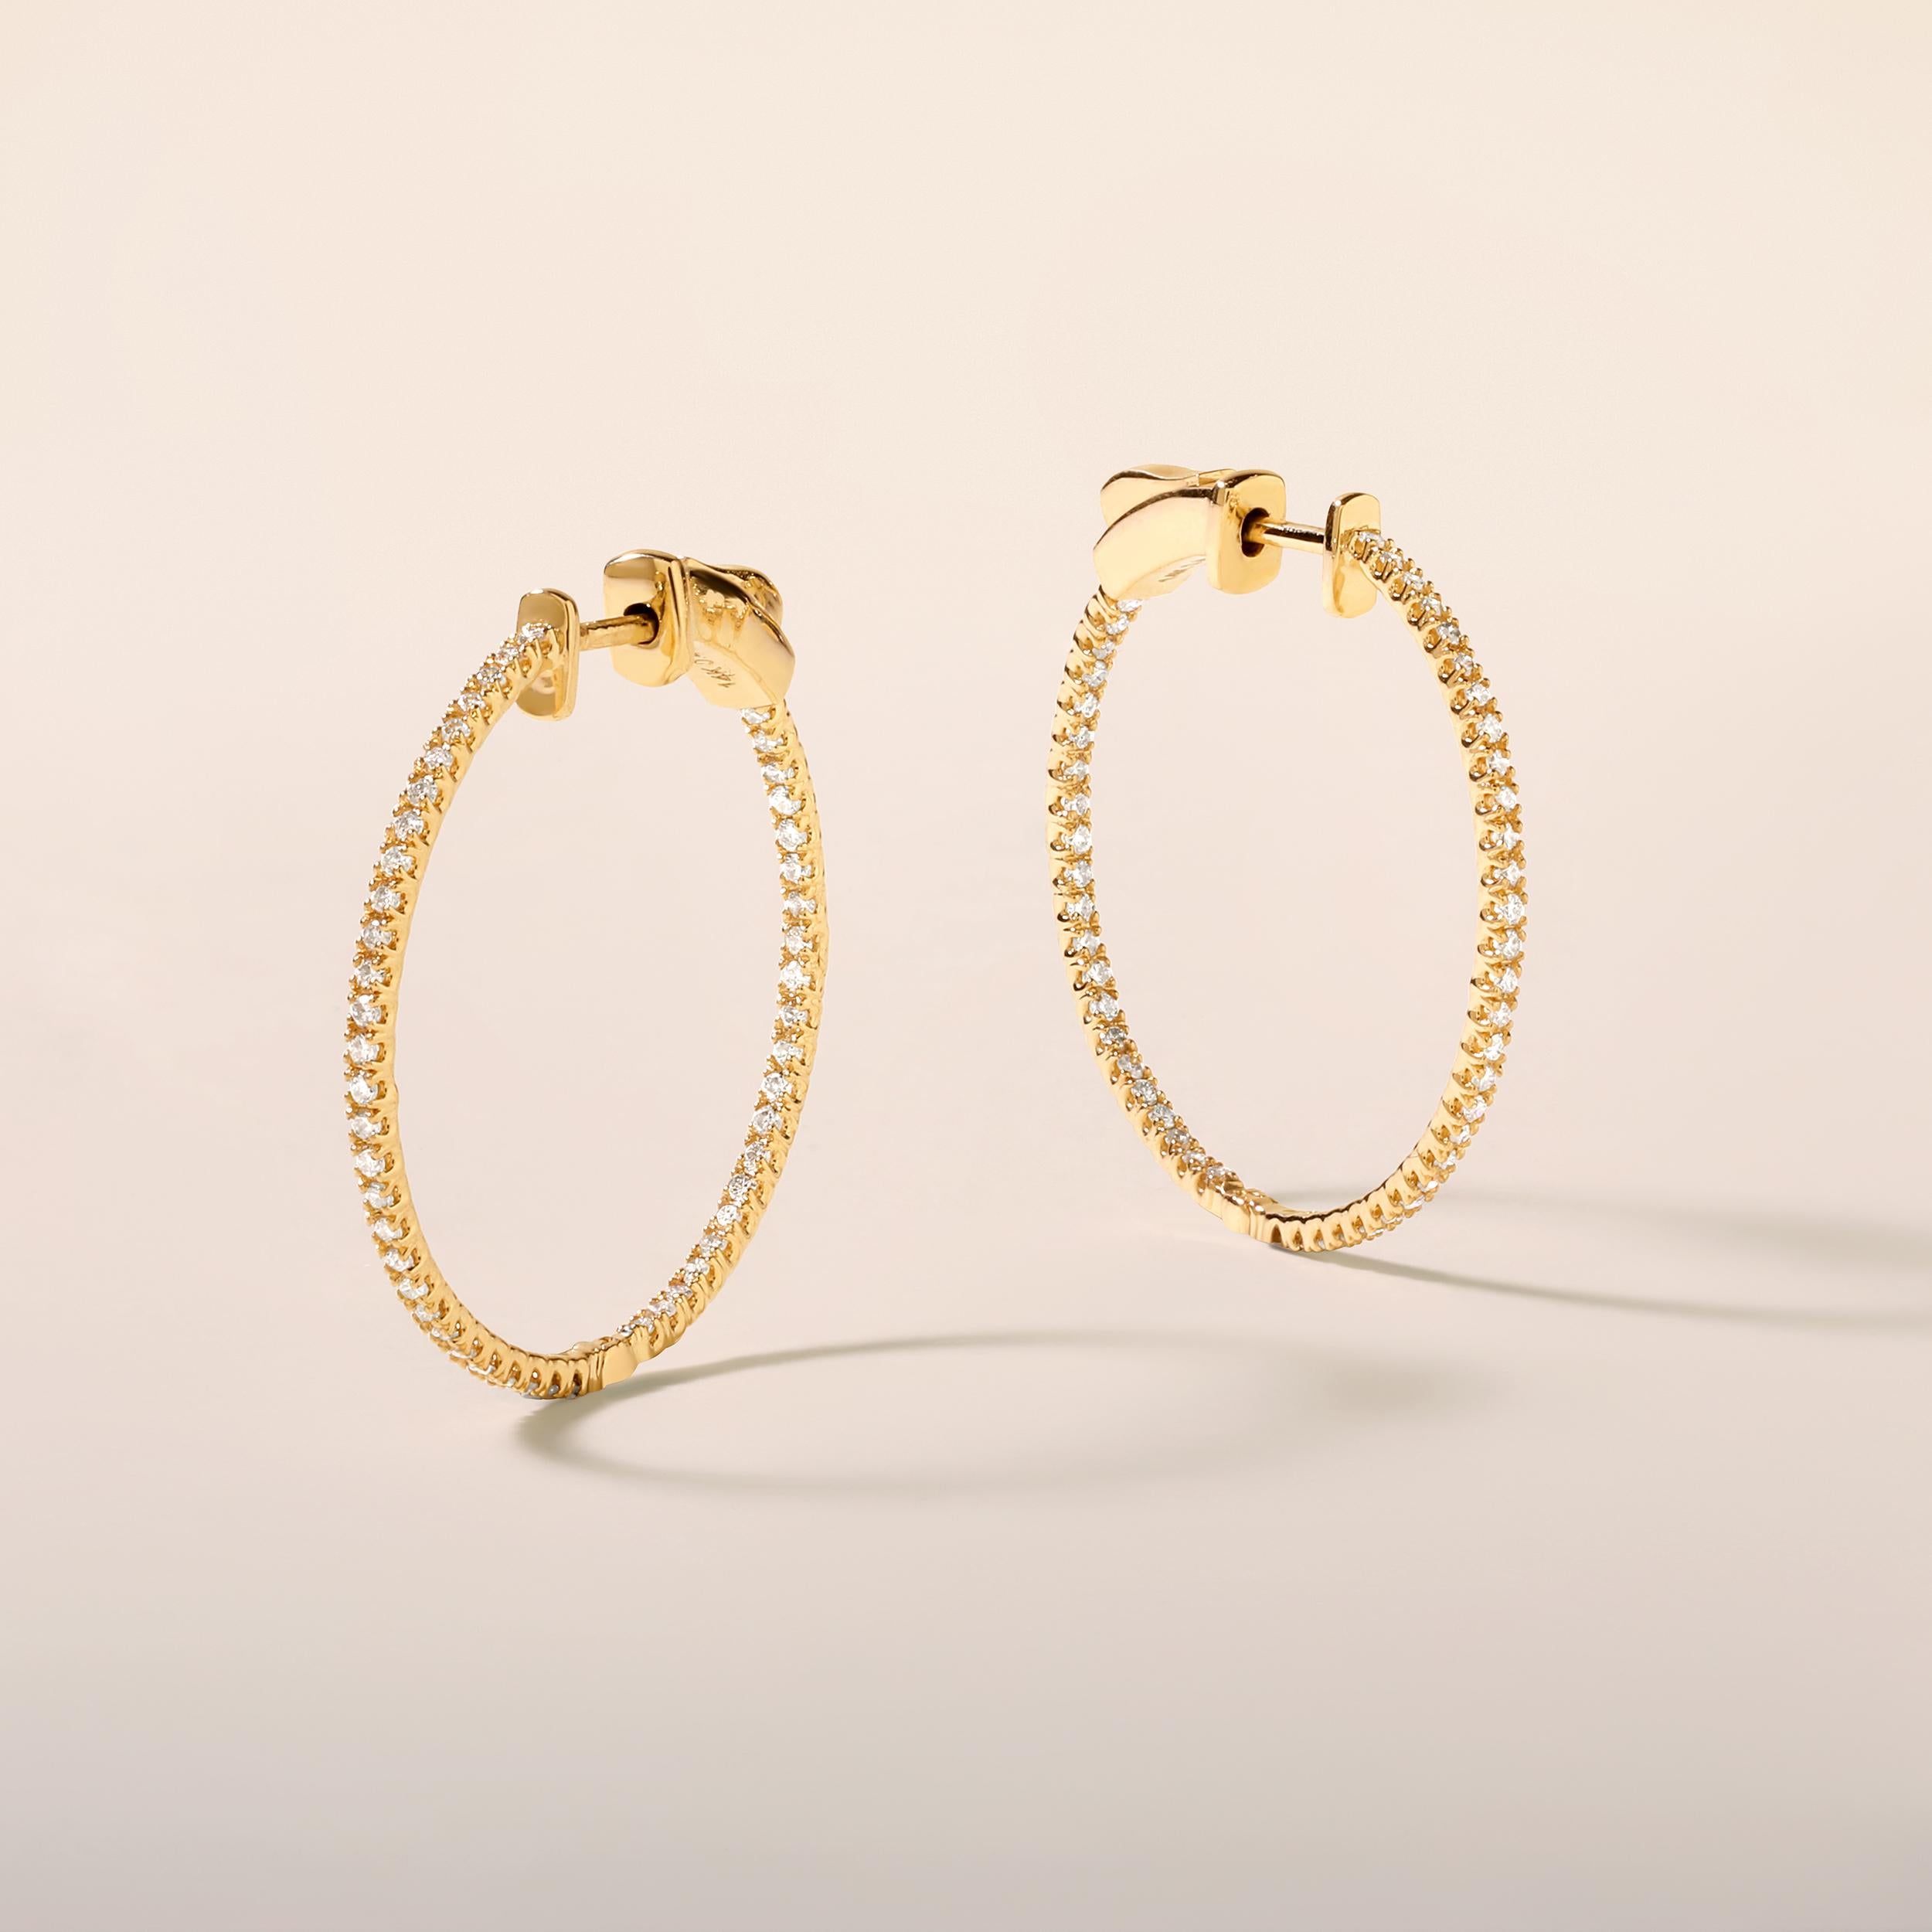 Crafted in 3.23 grams of 14K Yellow Gold, the earrings contains 100 stones of Round Diamonds with a total of 0.49 carat in G-H color and SI clarity.

CONTEMPORARY AND TIMELESS ESSENCE: Crafted in 14-karat/18-karat with 100% natural diamond and